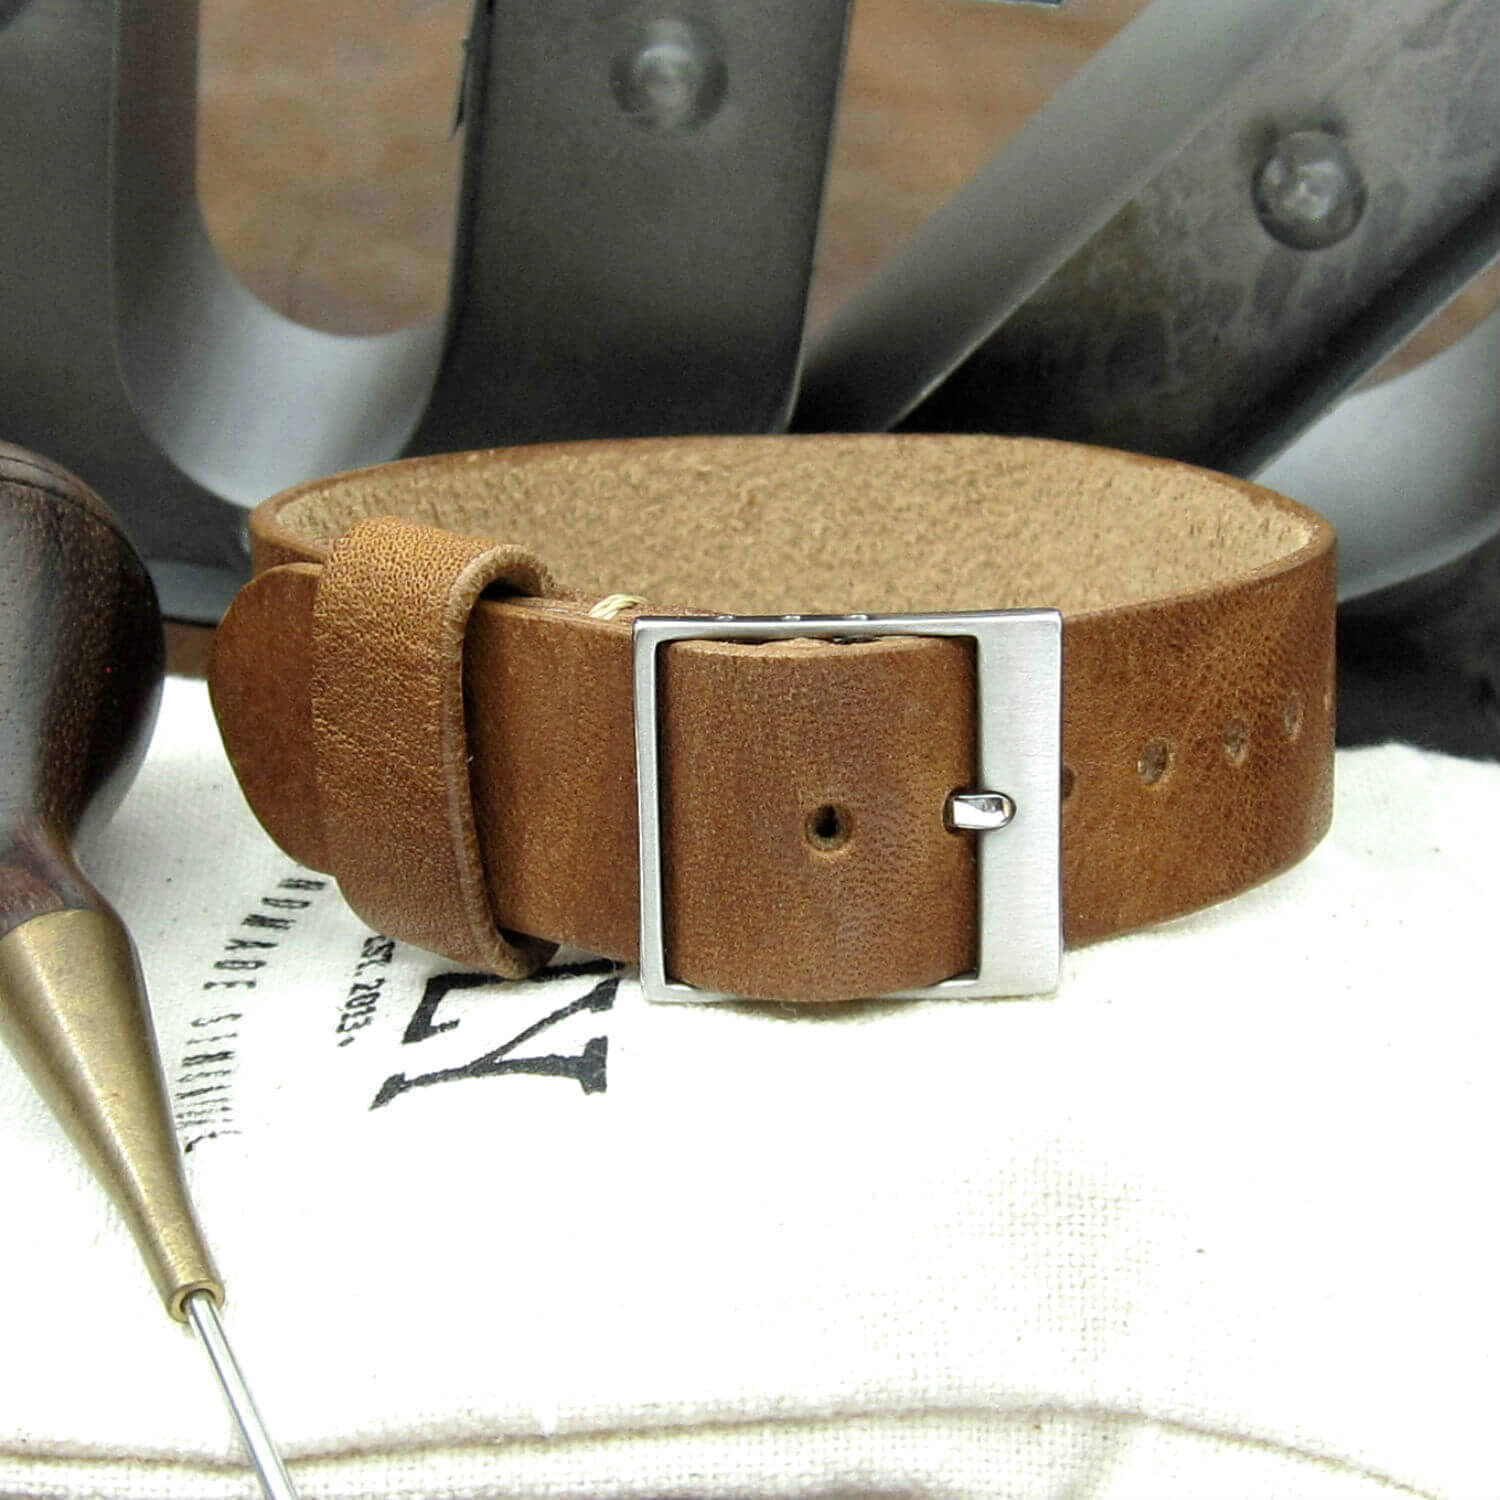 Leather Watch Strap, Classic RAF II Vintage 401 | Ladder Buckle | Full Grain Italian Vegetable-Tanned Leather | Cozy Handmade